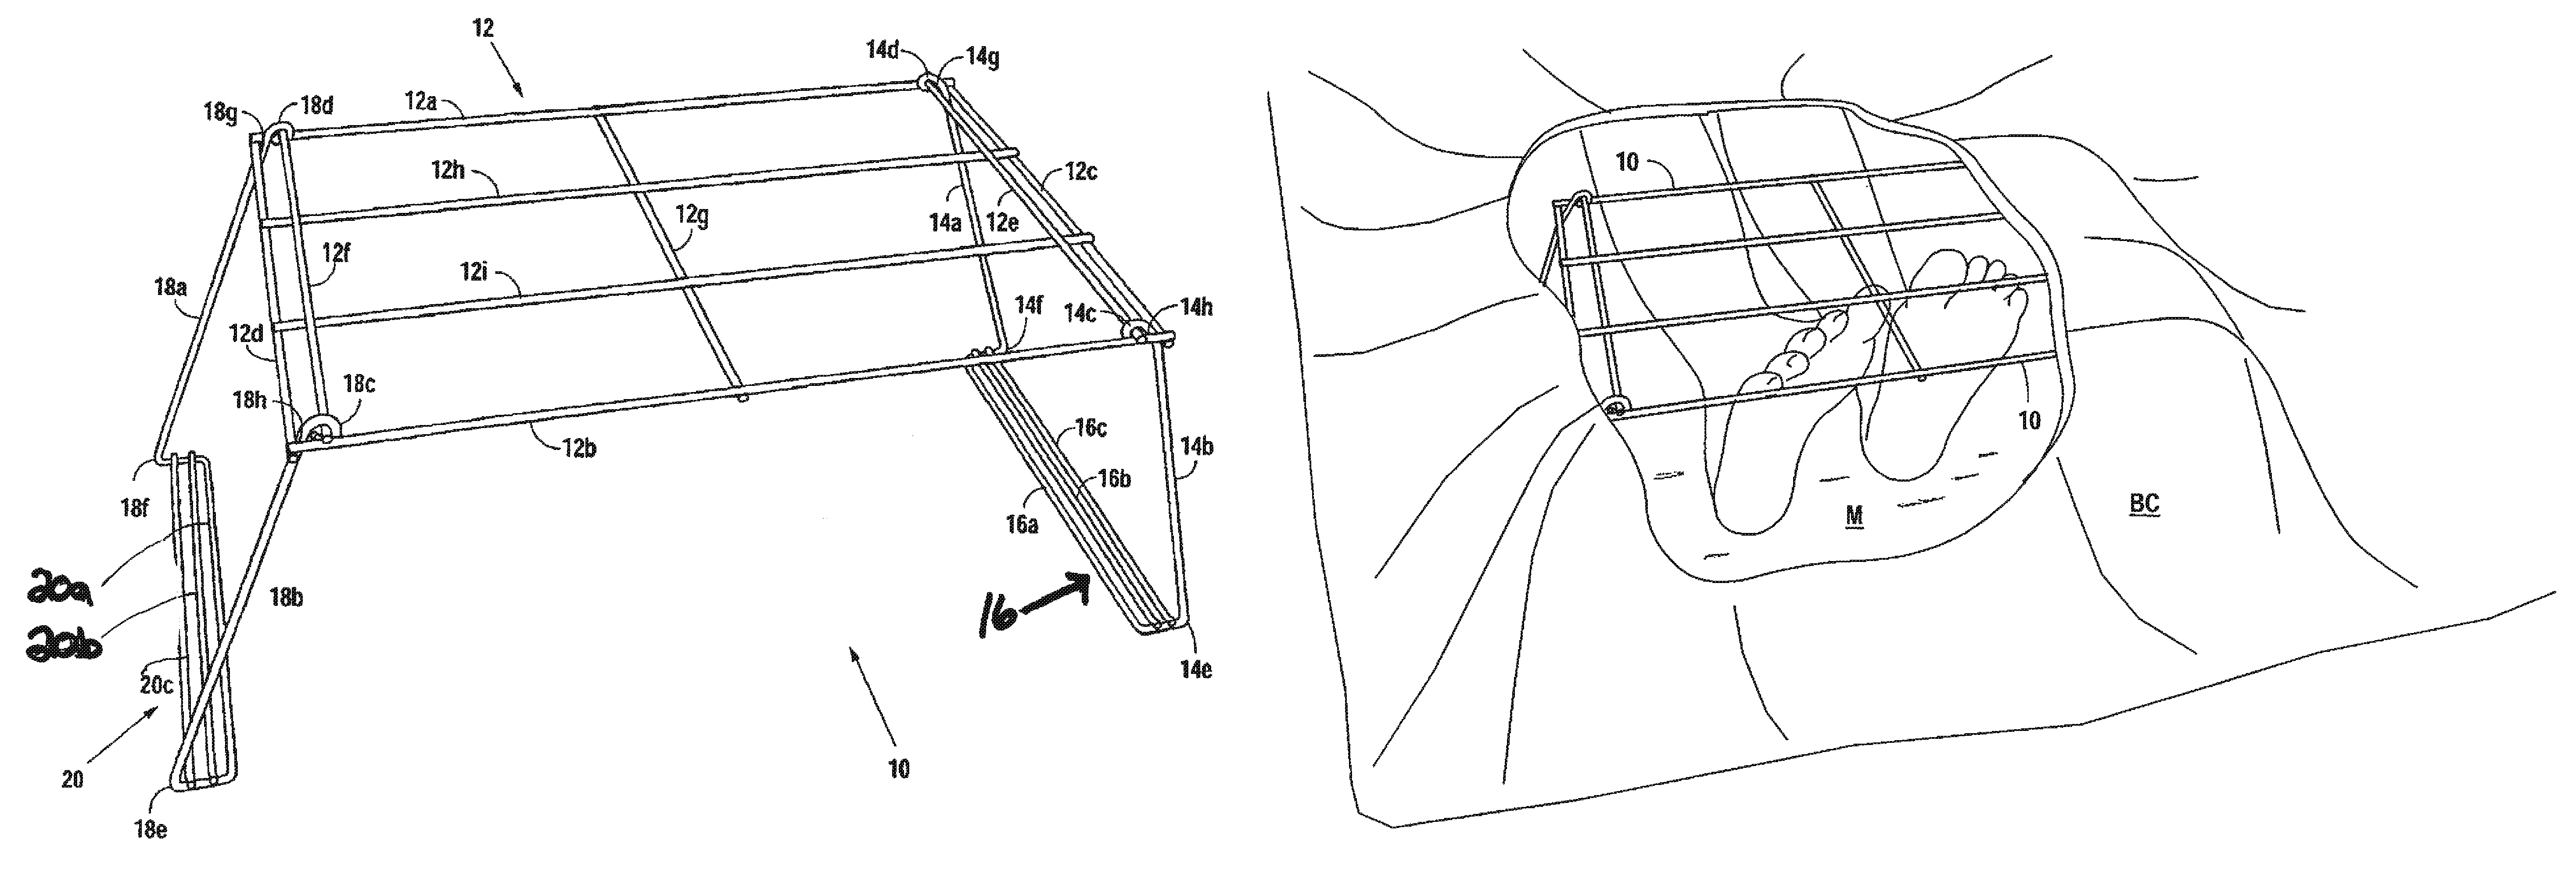 Folding foot protection device for a bedded patient